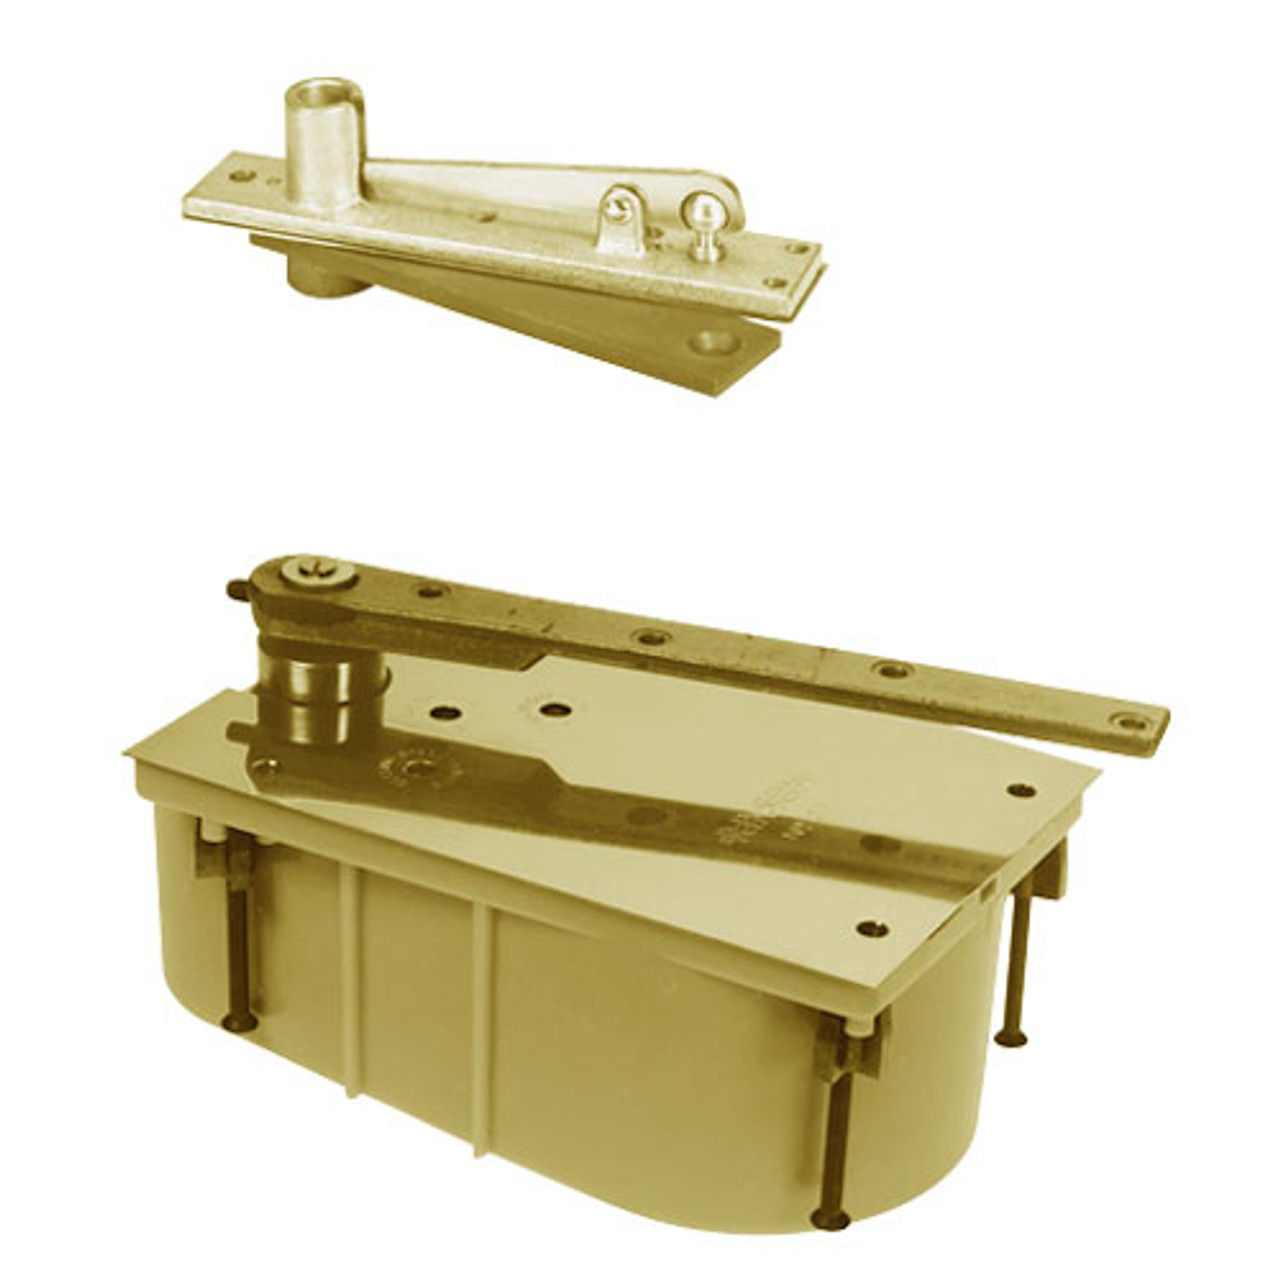 SC28-105S-554-CWF-RH-606 Rixson 28 Series Heavy Duty Single Acting Center Hung Floor Closer with Concealed Arm in Satin Brass Finish